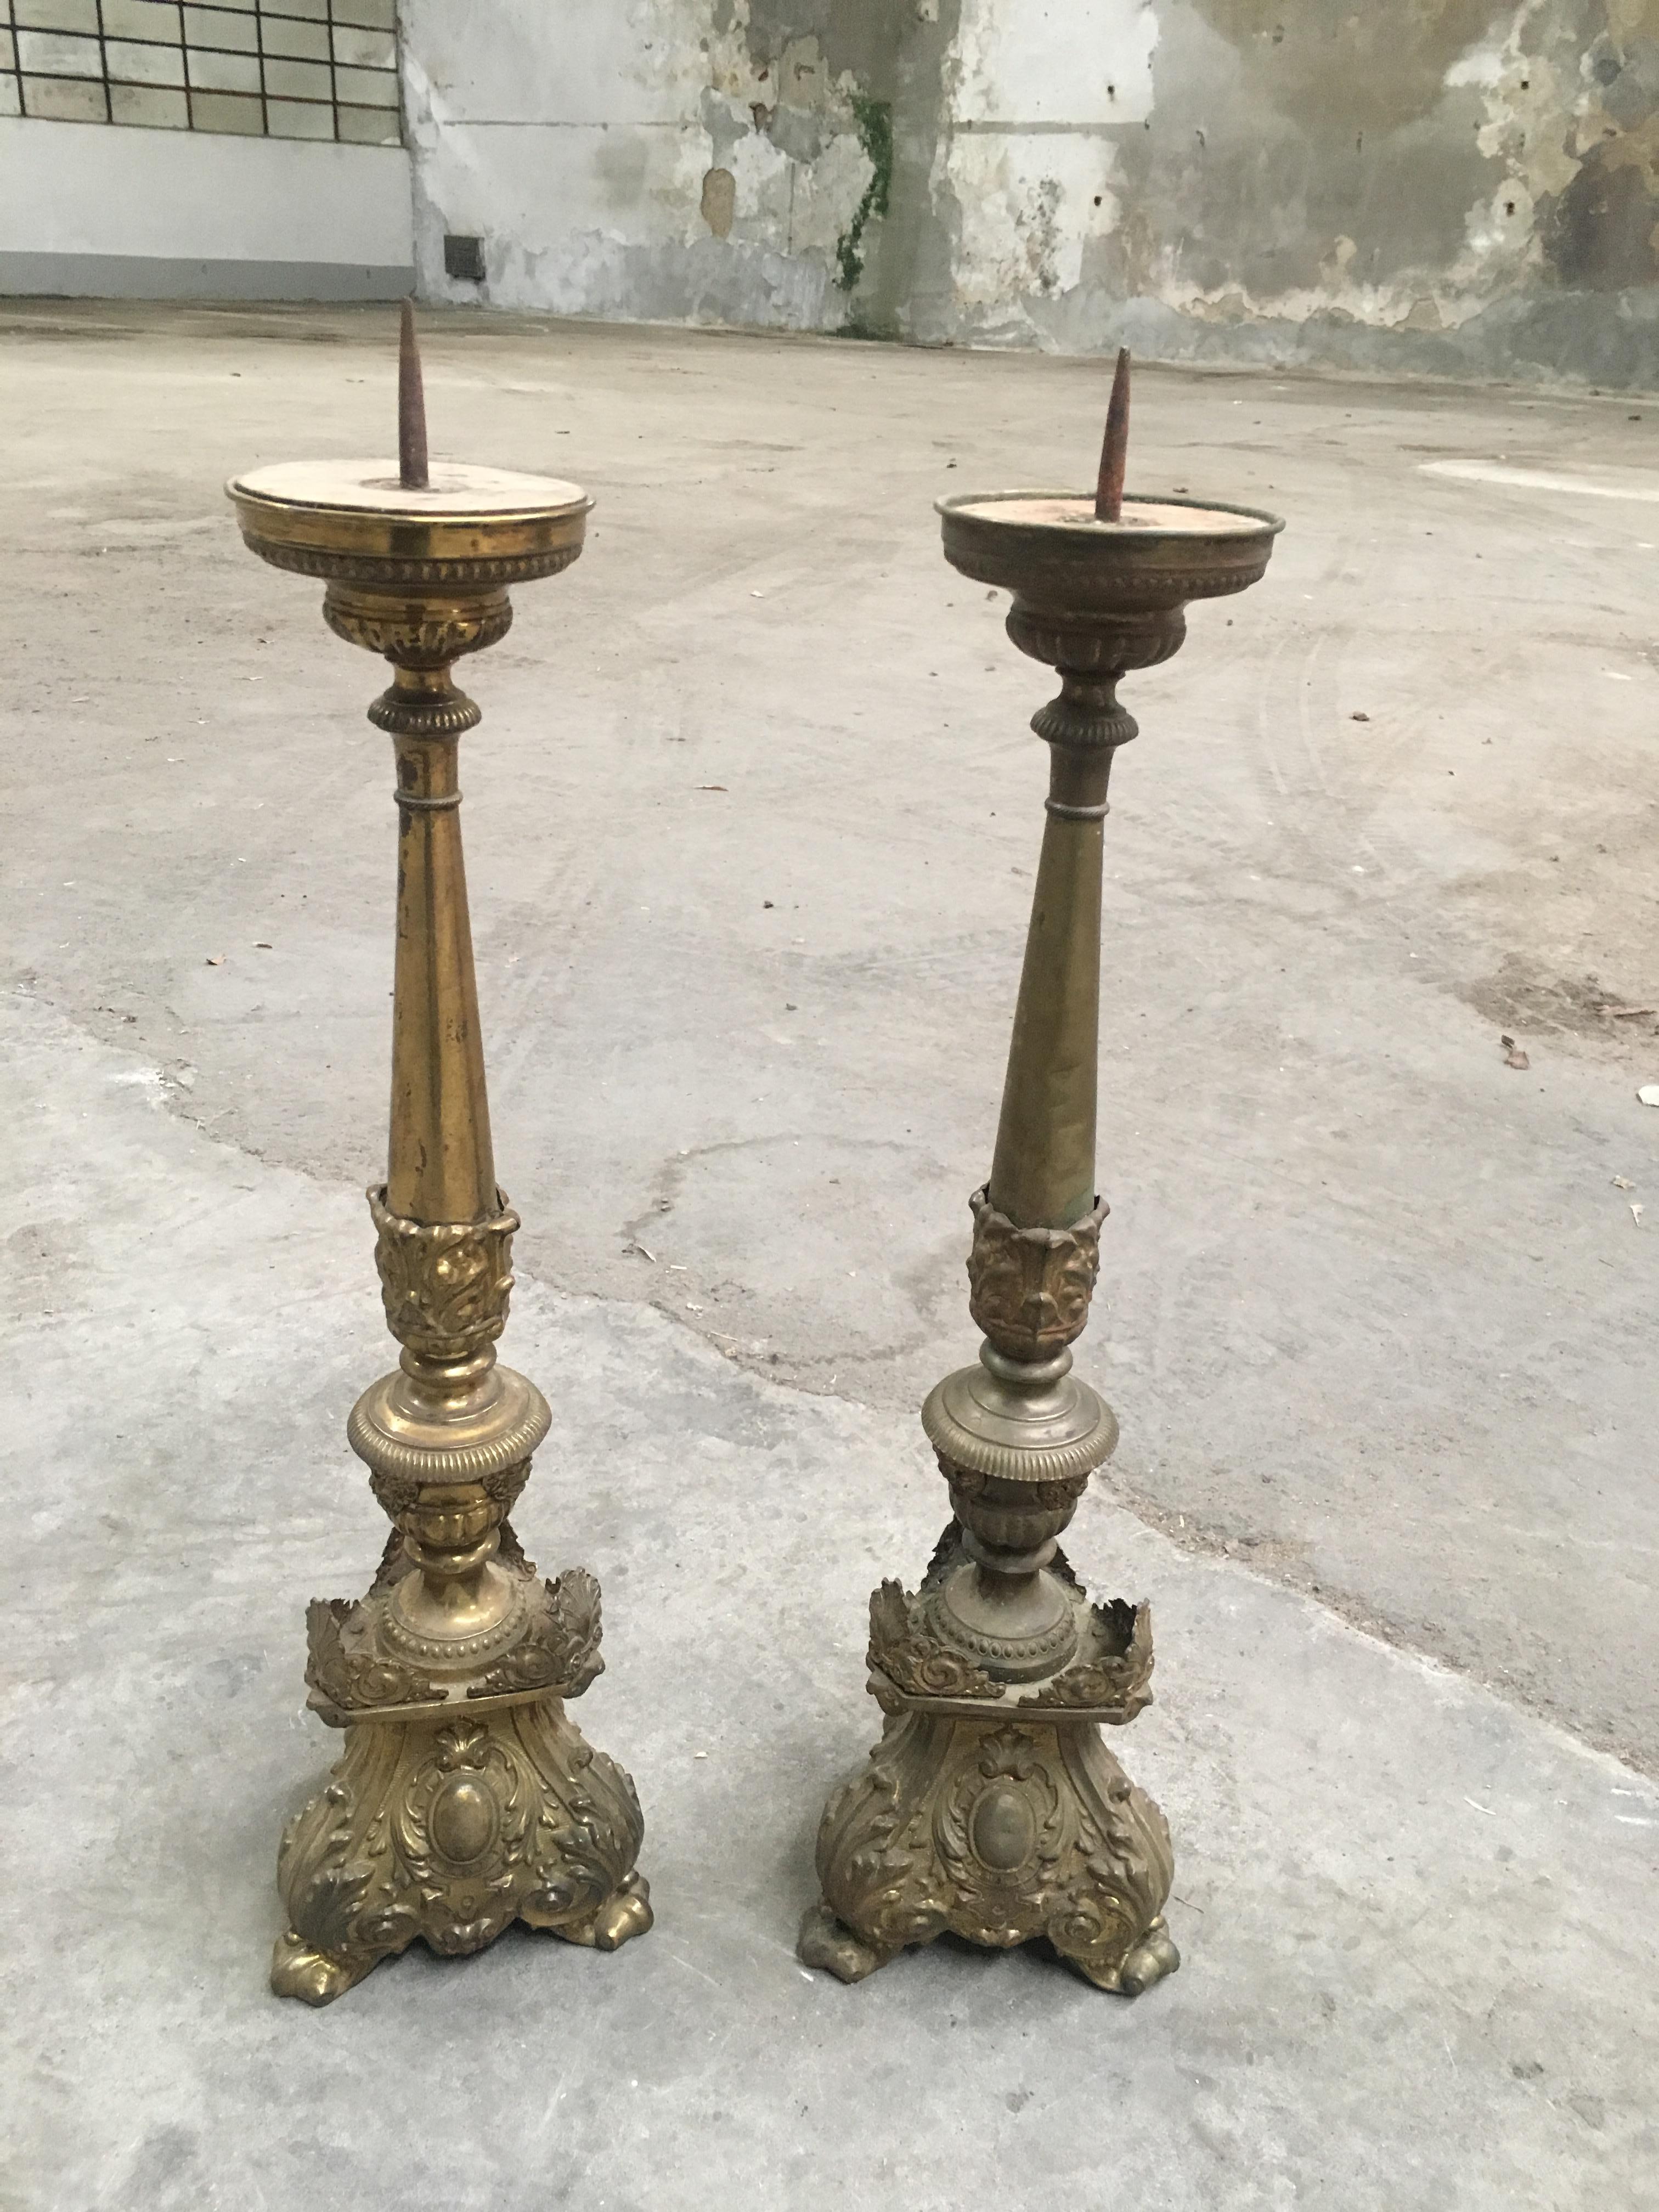 19th century pair of Italian ecclesiastic altar brass candle holders in good vintage condition